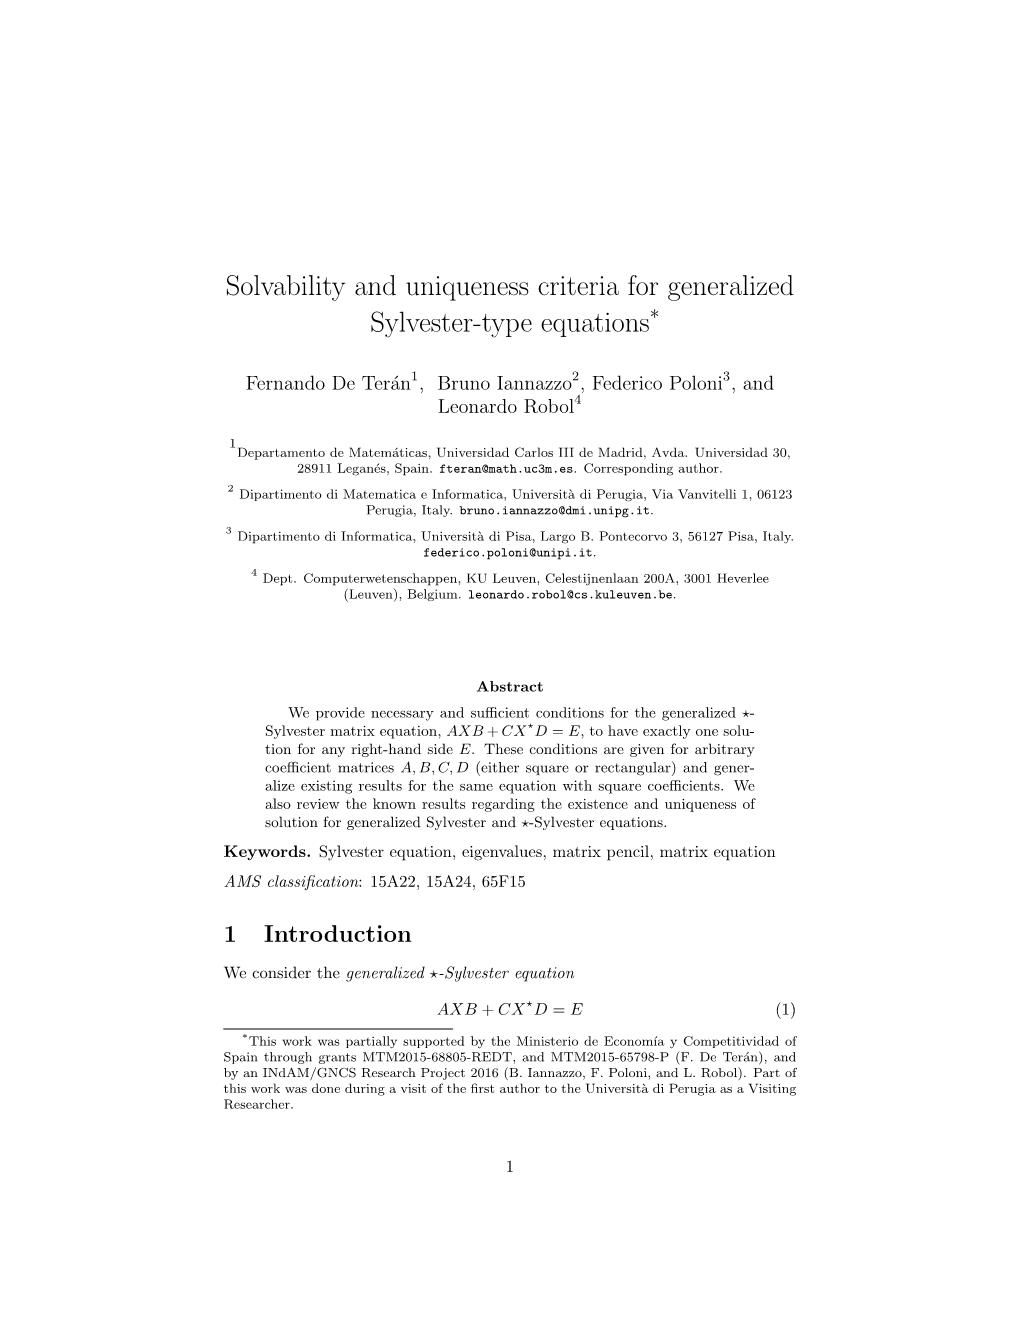 Solvability and Uniqueness Criteria for Generalized Sylvester-Type Equations∗